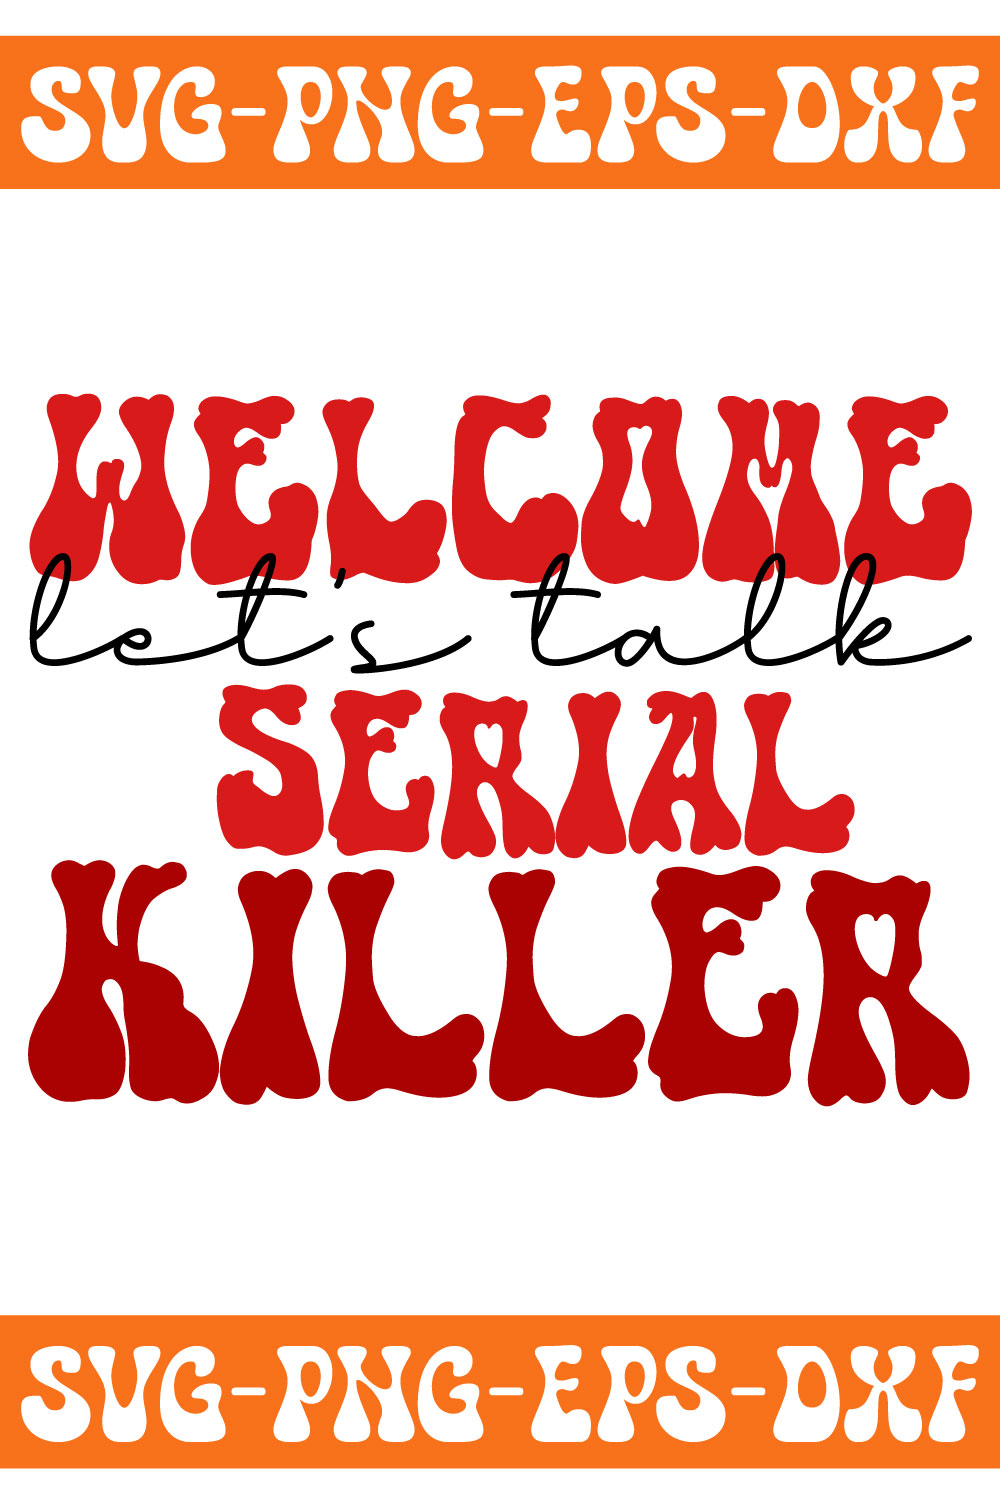 Sign that says welcome to the serial killer.